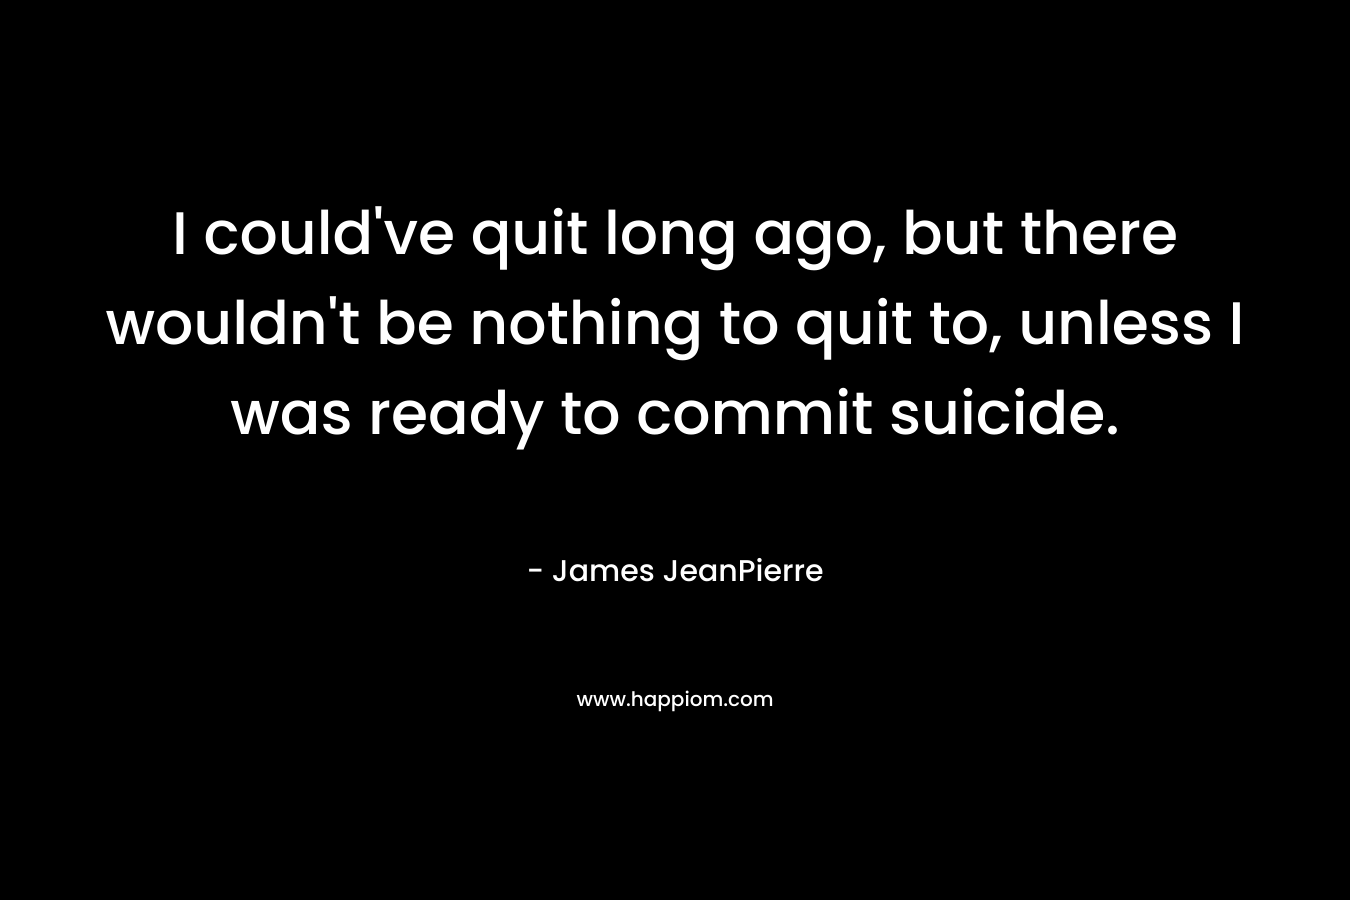 I could've quit long ago, but there wouldn't be nothing to quit to, unless I was ready to commit suicide.